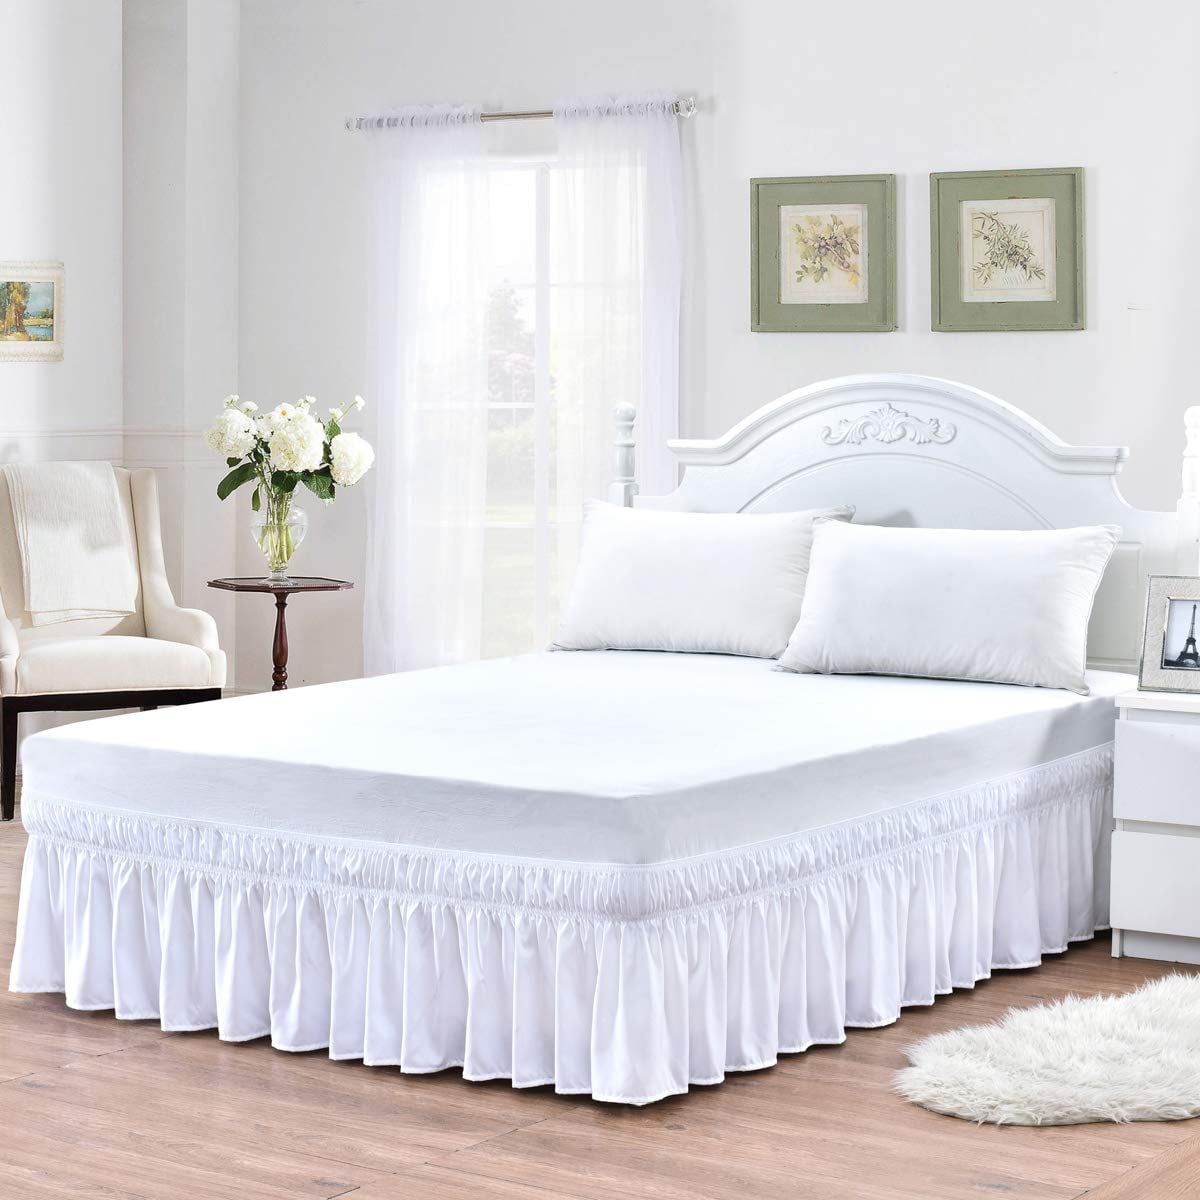 Virego White Wrap Around Bed Skirts with Adjustable Elastic Belt for ...